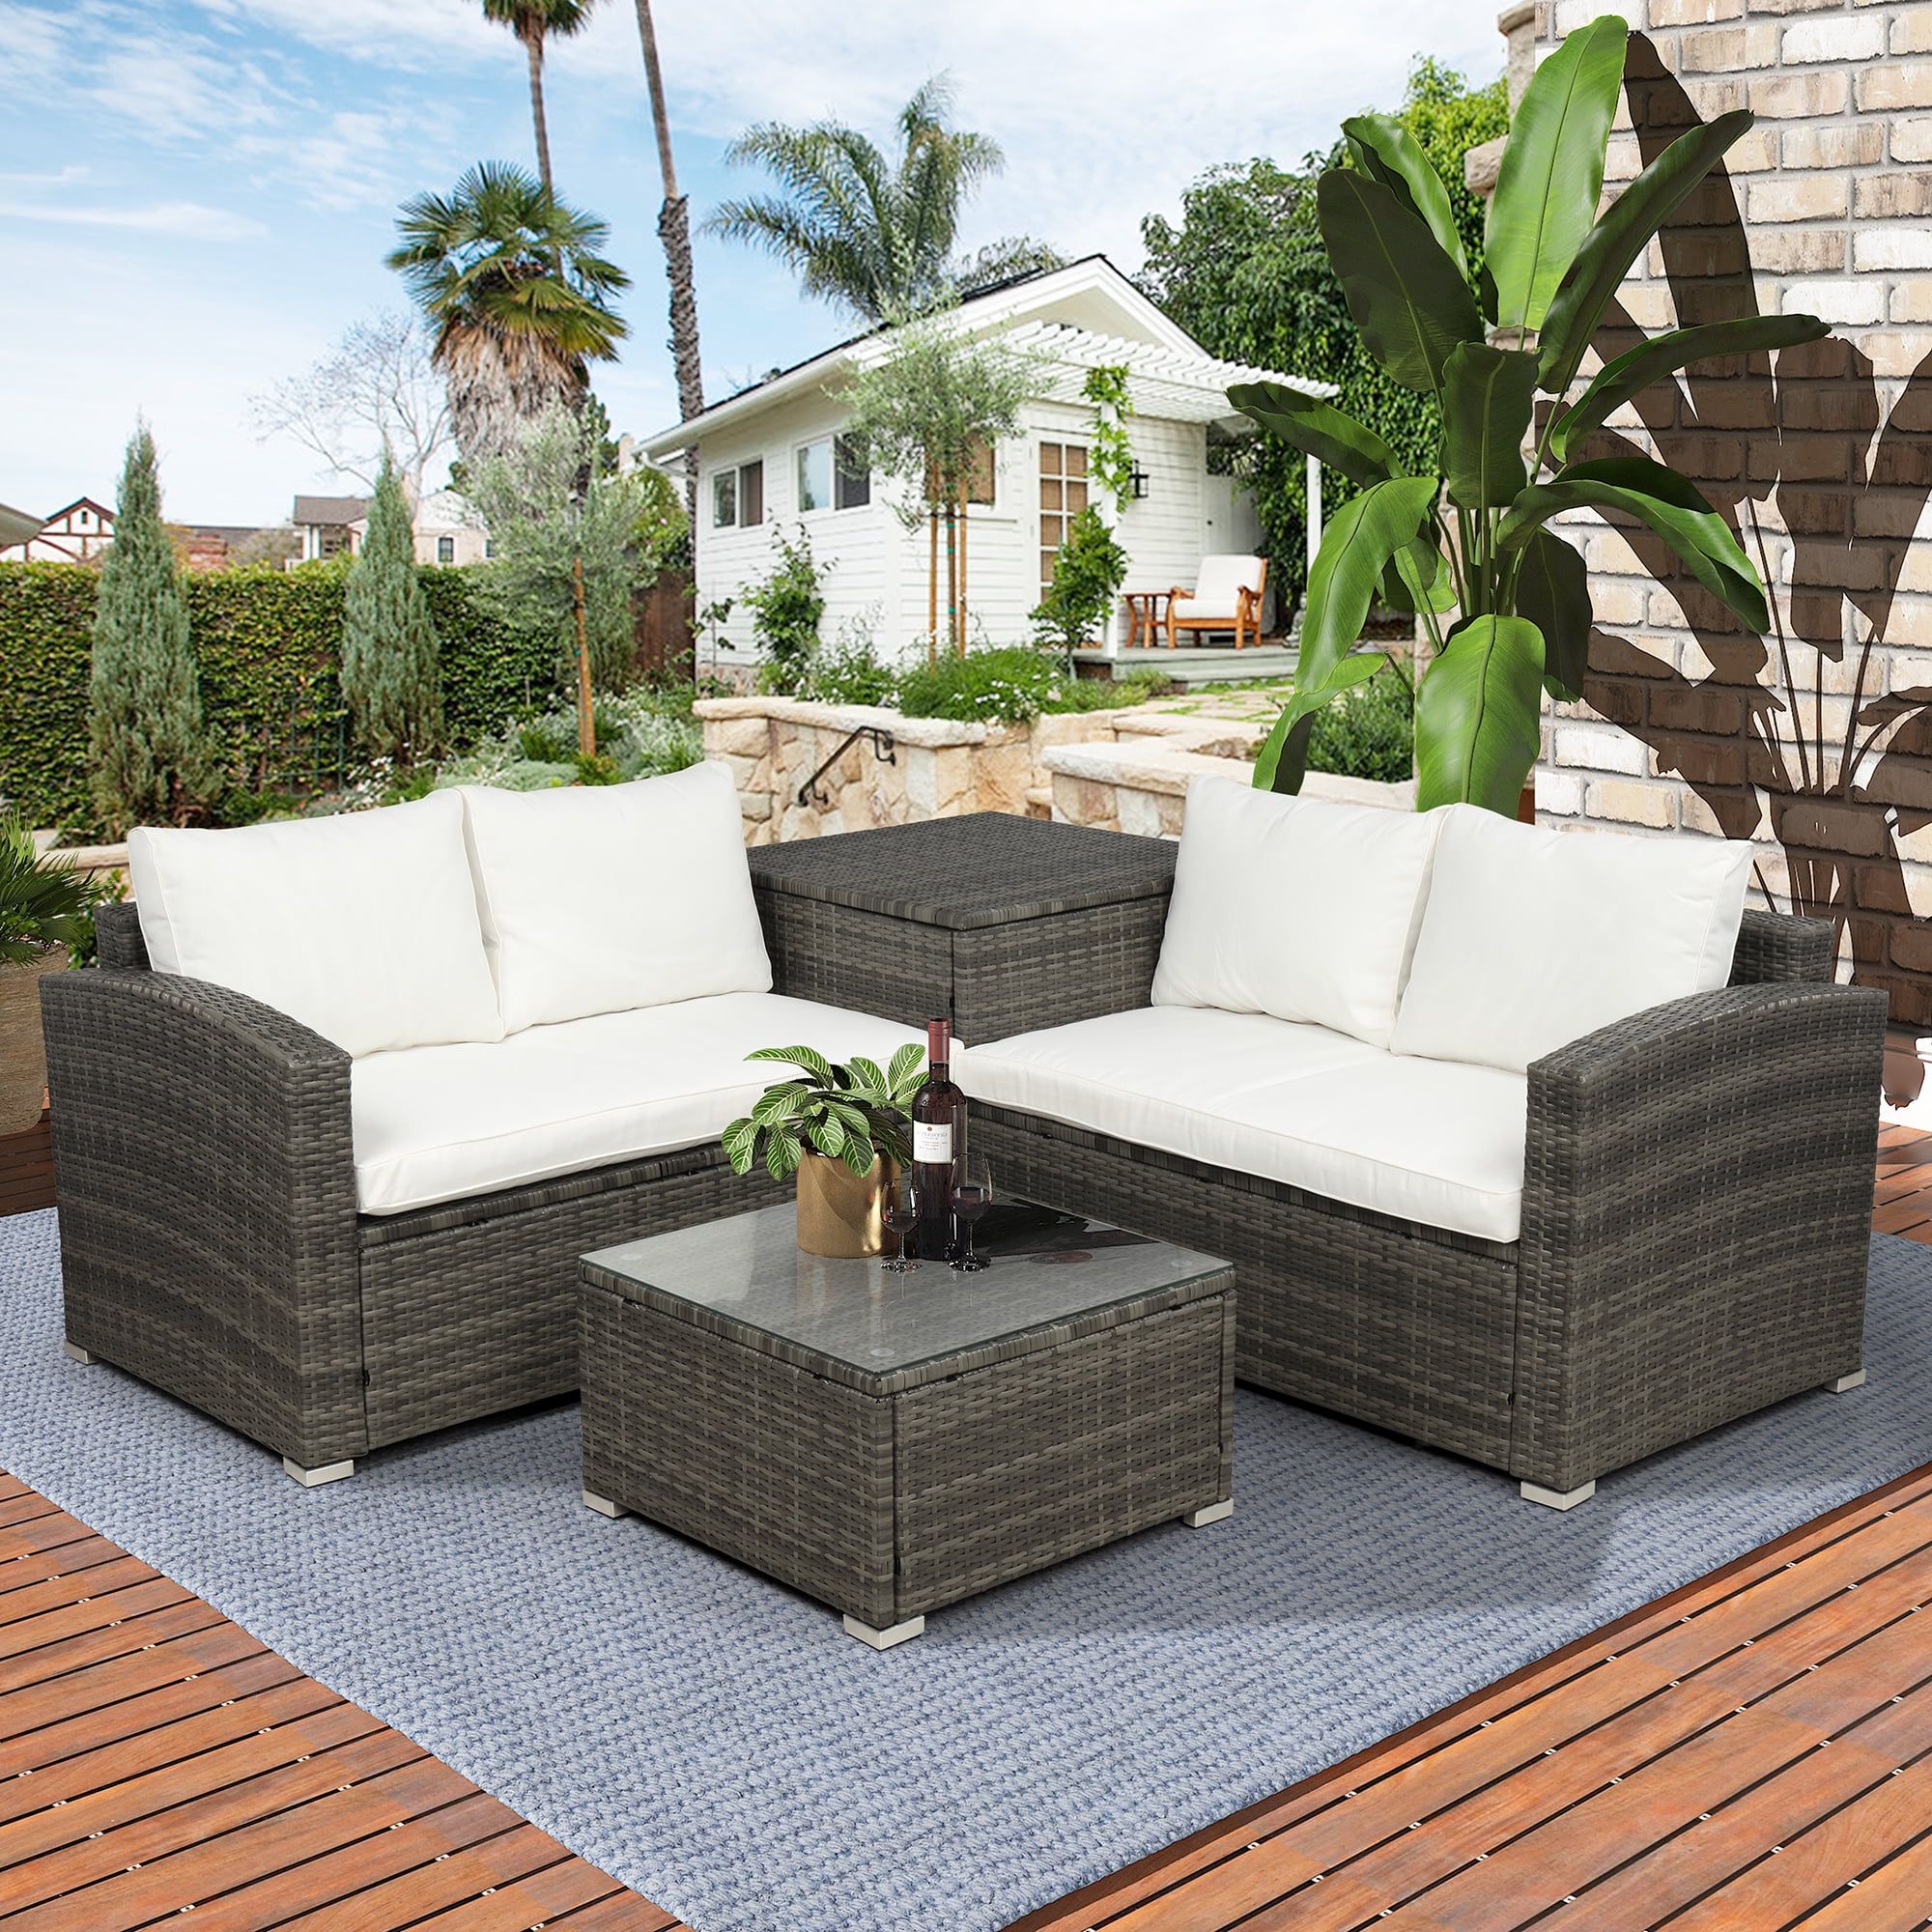 Well Known 4pcs Rattan Patio Coffee Tables Regarding 4 Piece Rattan Patio Furniture Sets, Wicker Bistro With Ottoman Coffee (View 5 of 15)